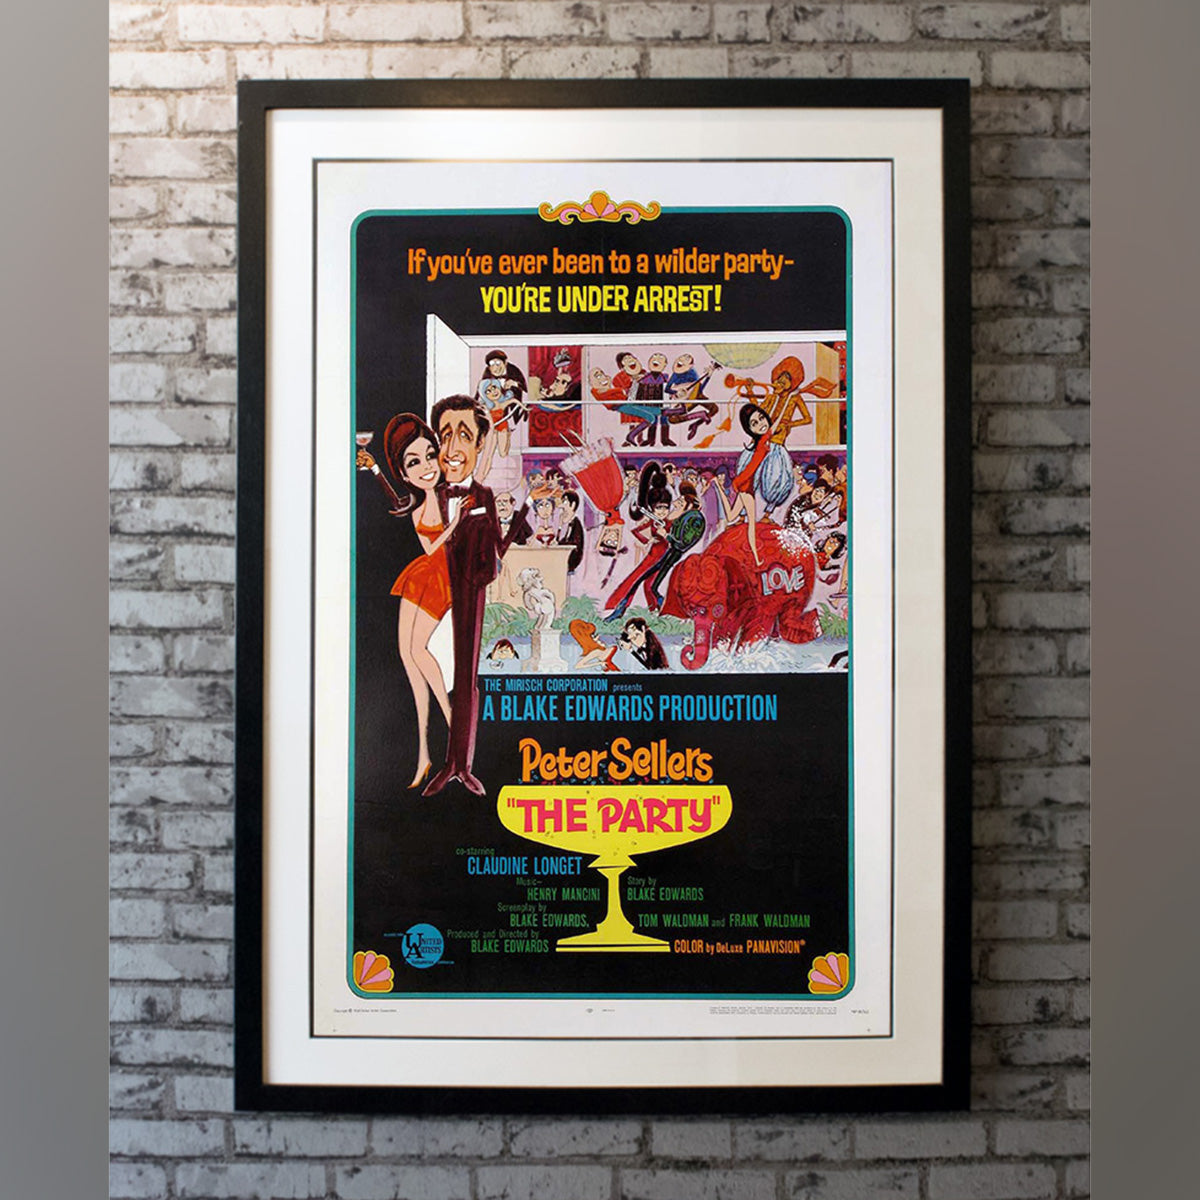 Original Movie Poster of Party, The (1968)